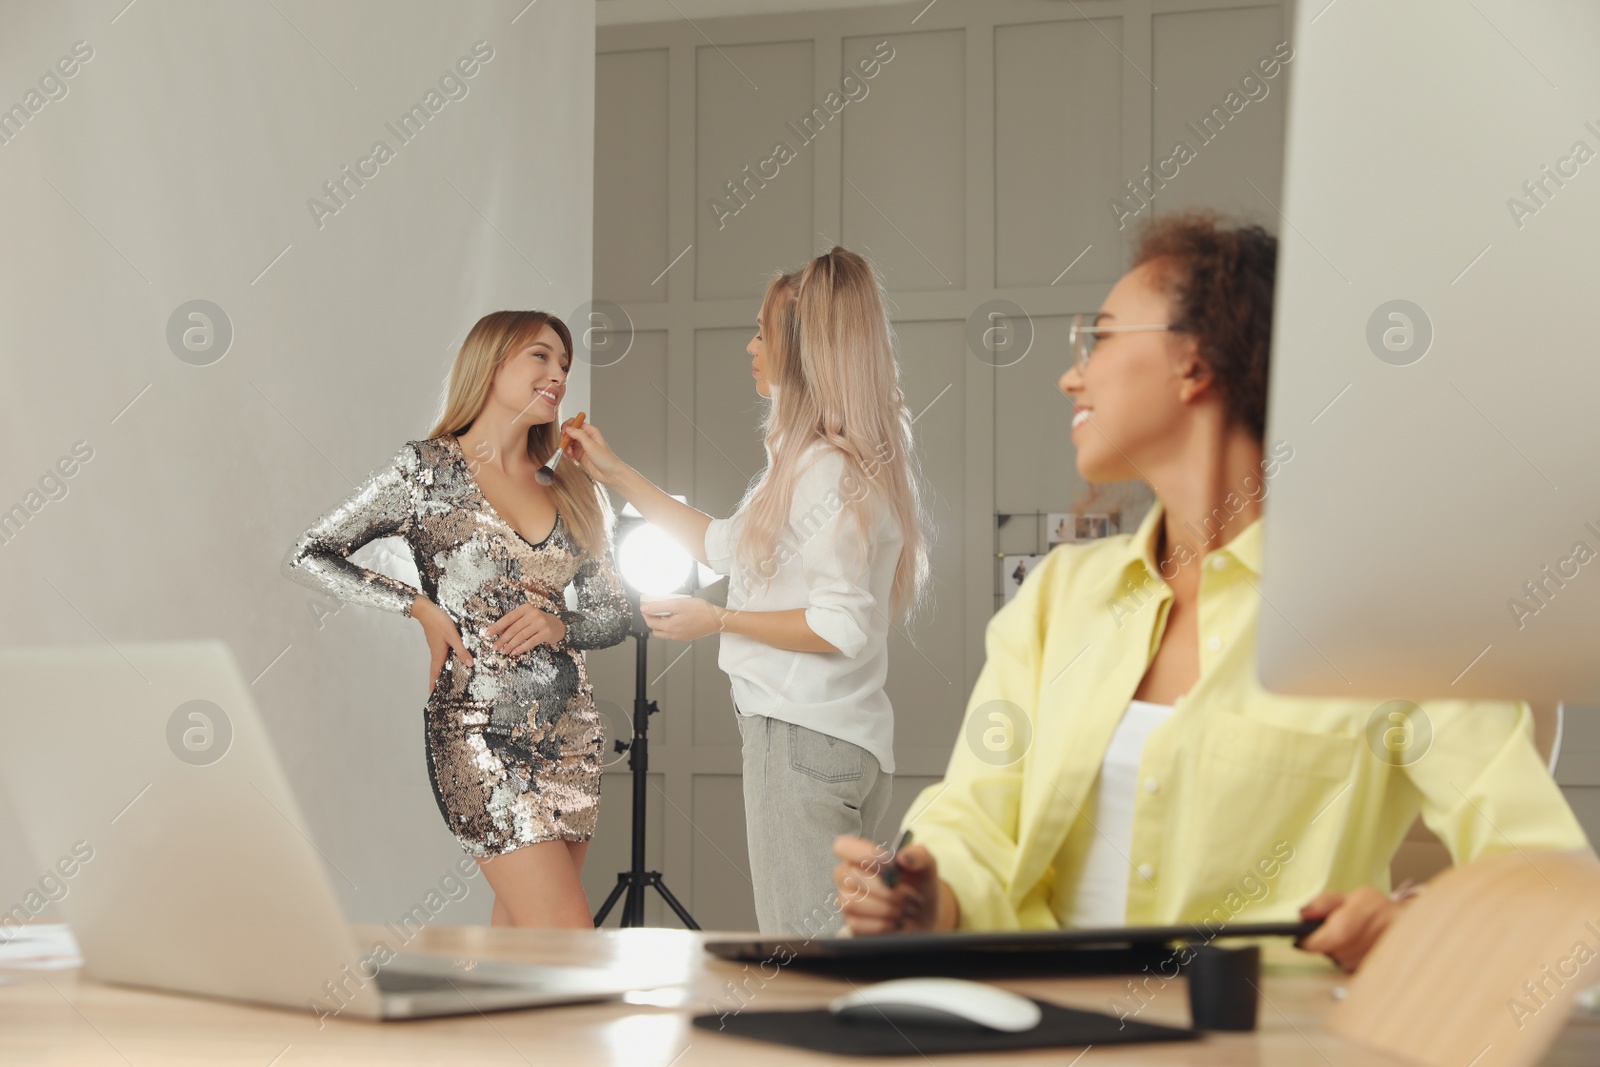 Photo of Makeup artist working with model while professional African American retoucher editing image on graphic tablet at desk in photo studio